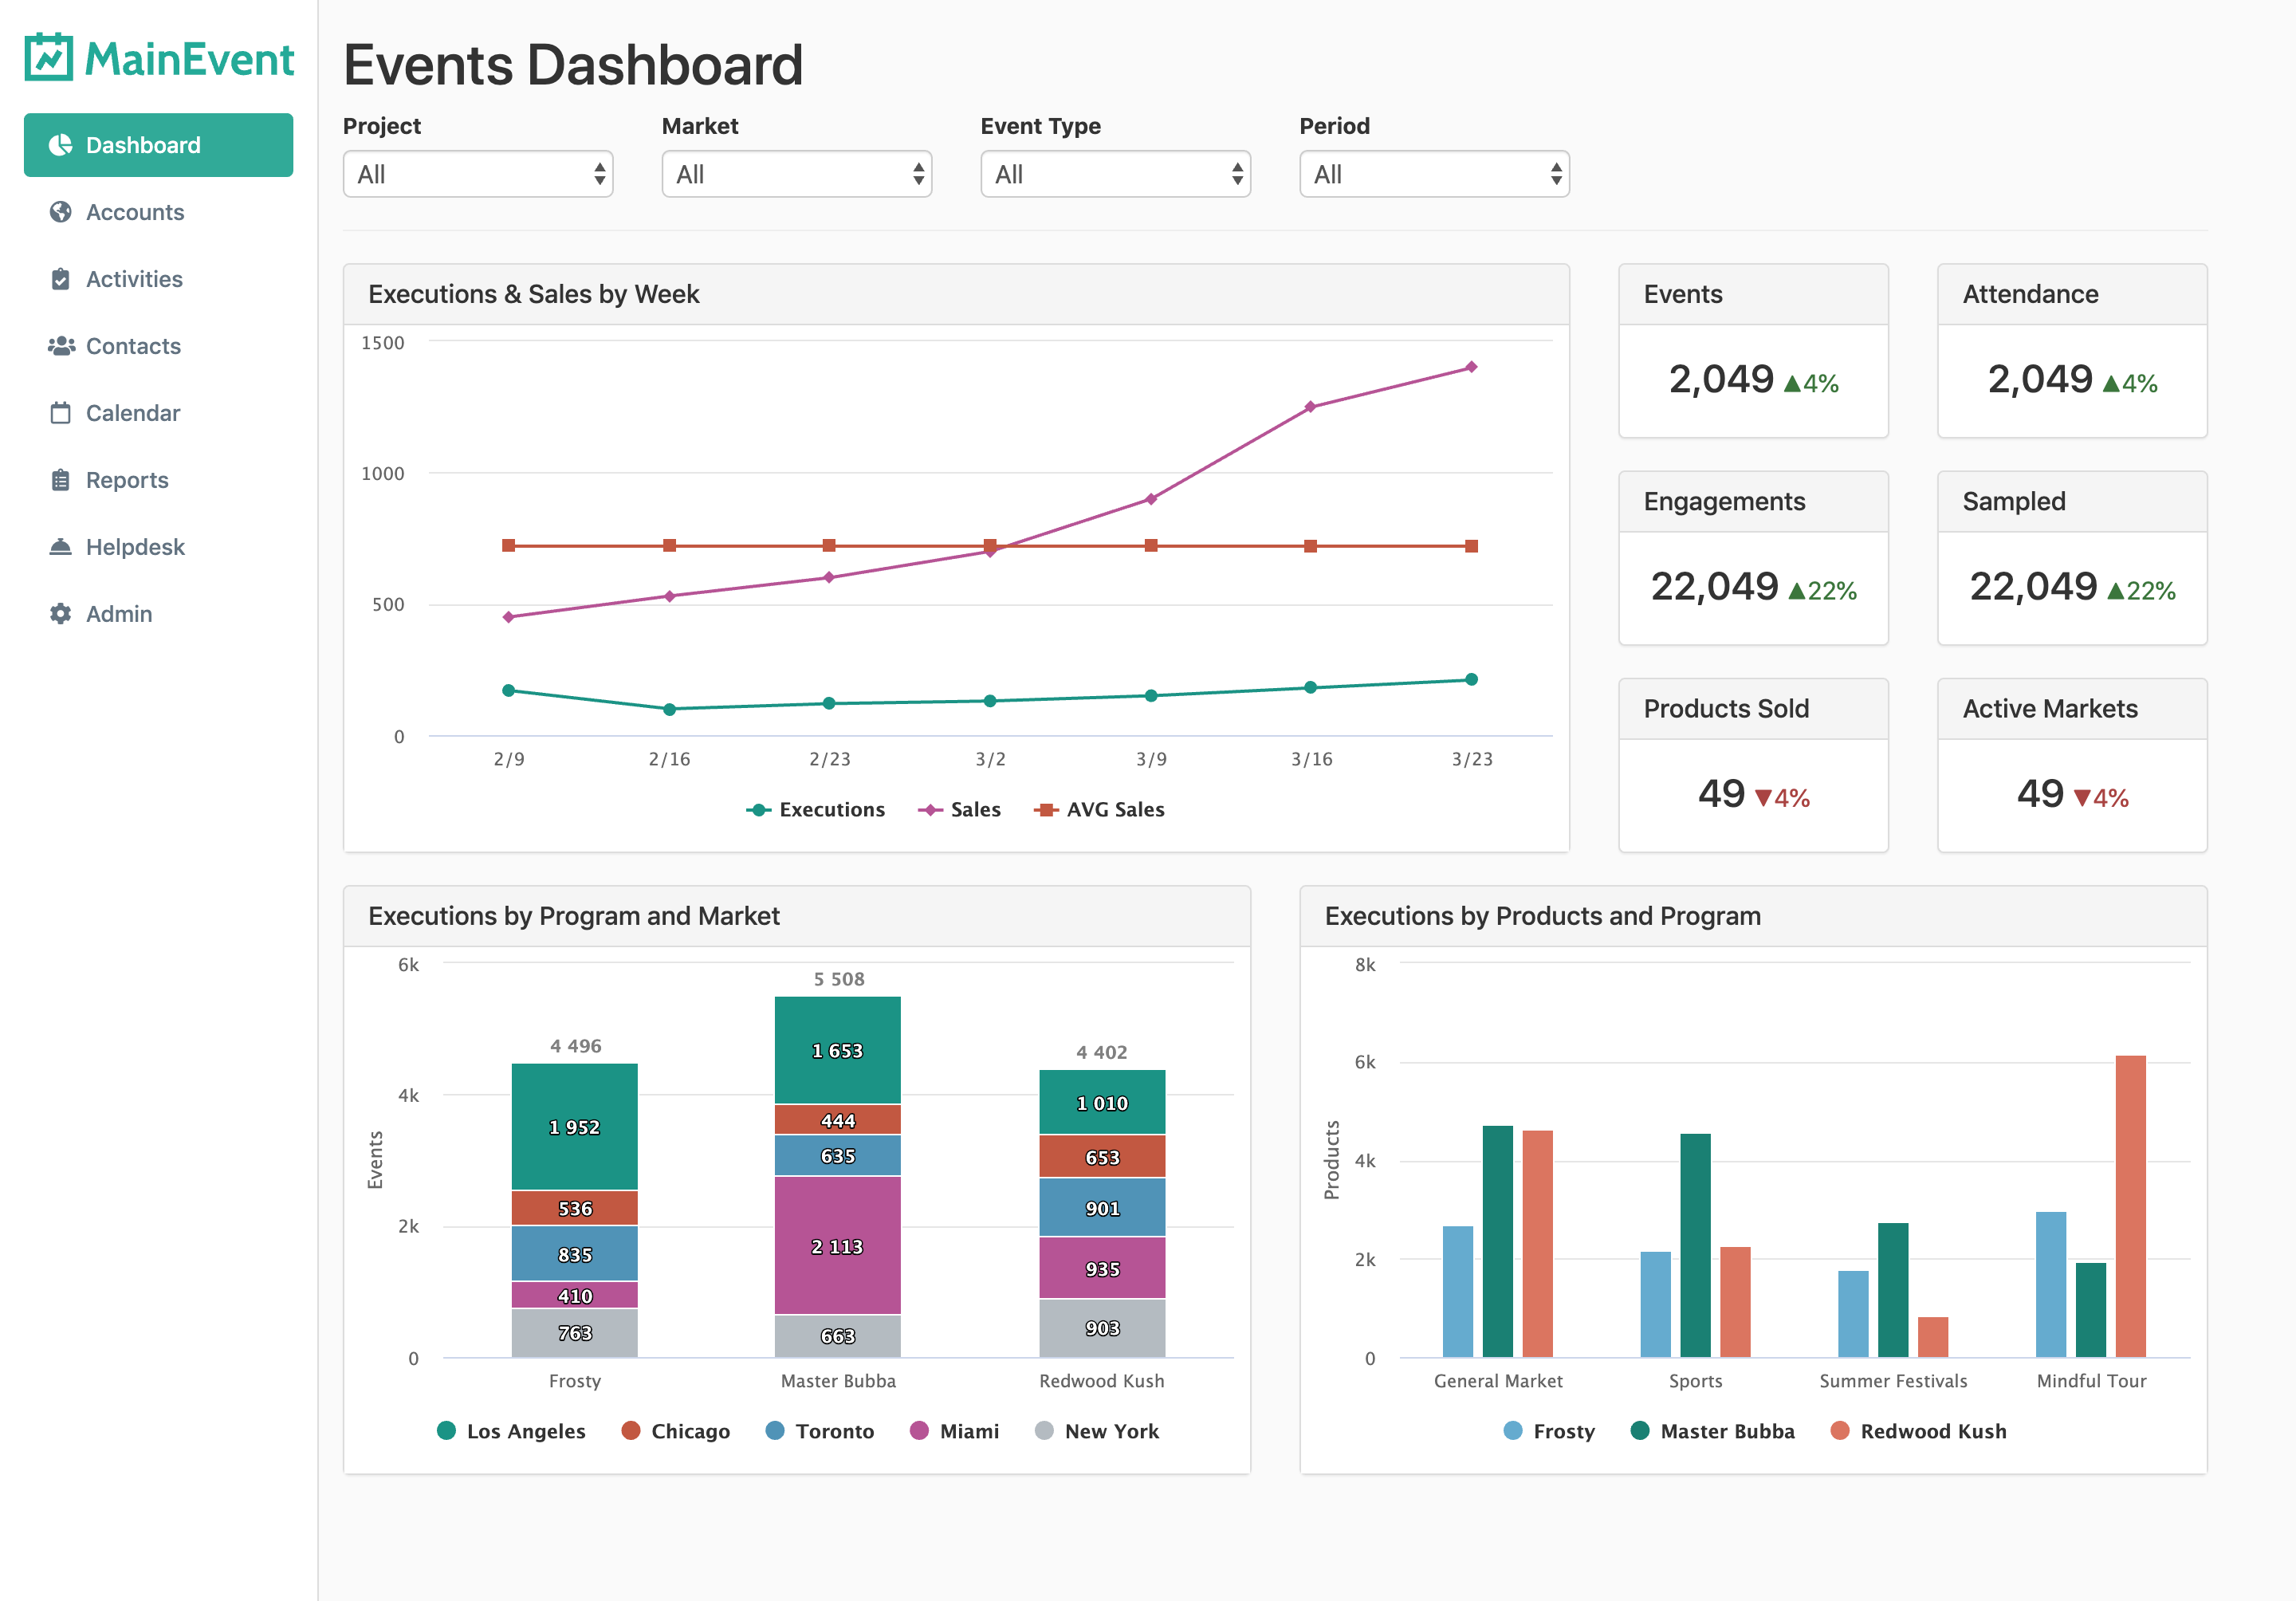 Dashboards: Customizable dashboards that are built using editable widgets, showcasing data through a variety of graphing tools.